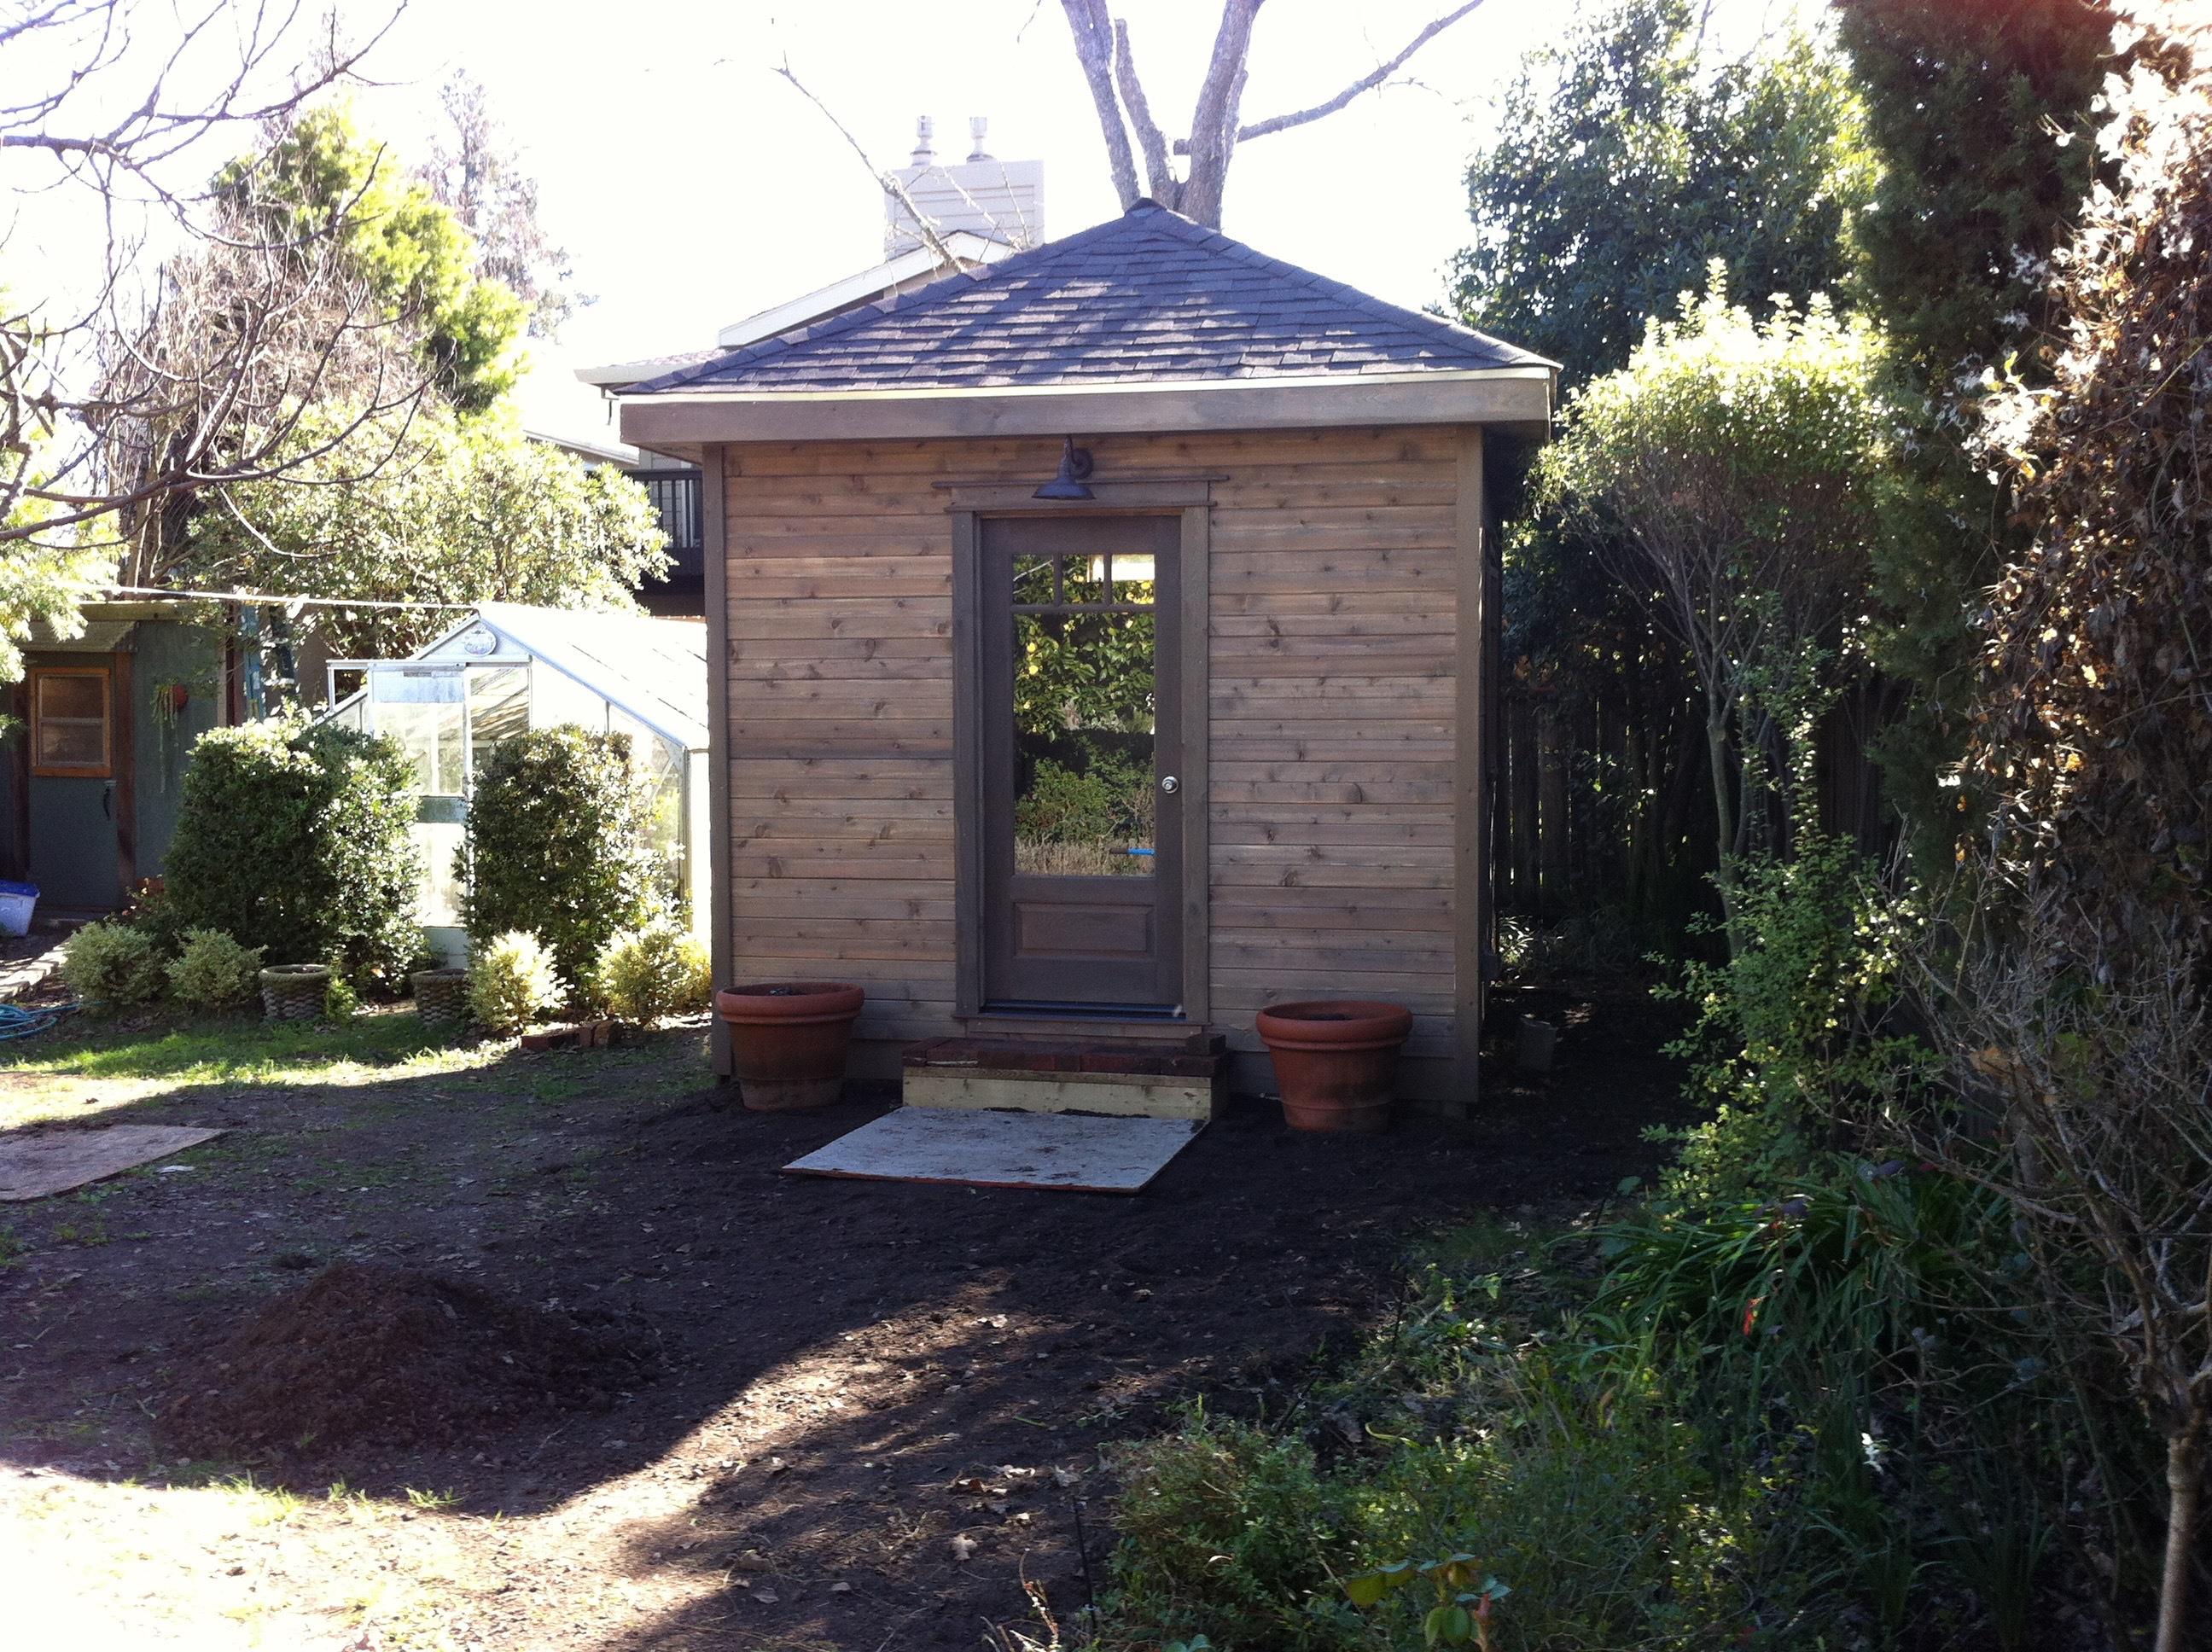 Cedar sonoma shed kit 7x12 with large opening windows in California USA. ID number 198110-1